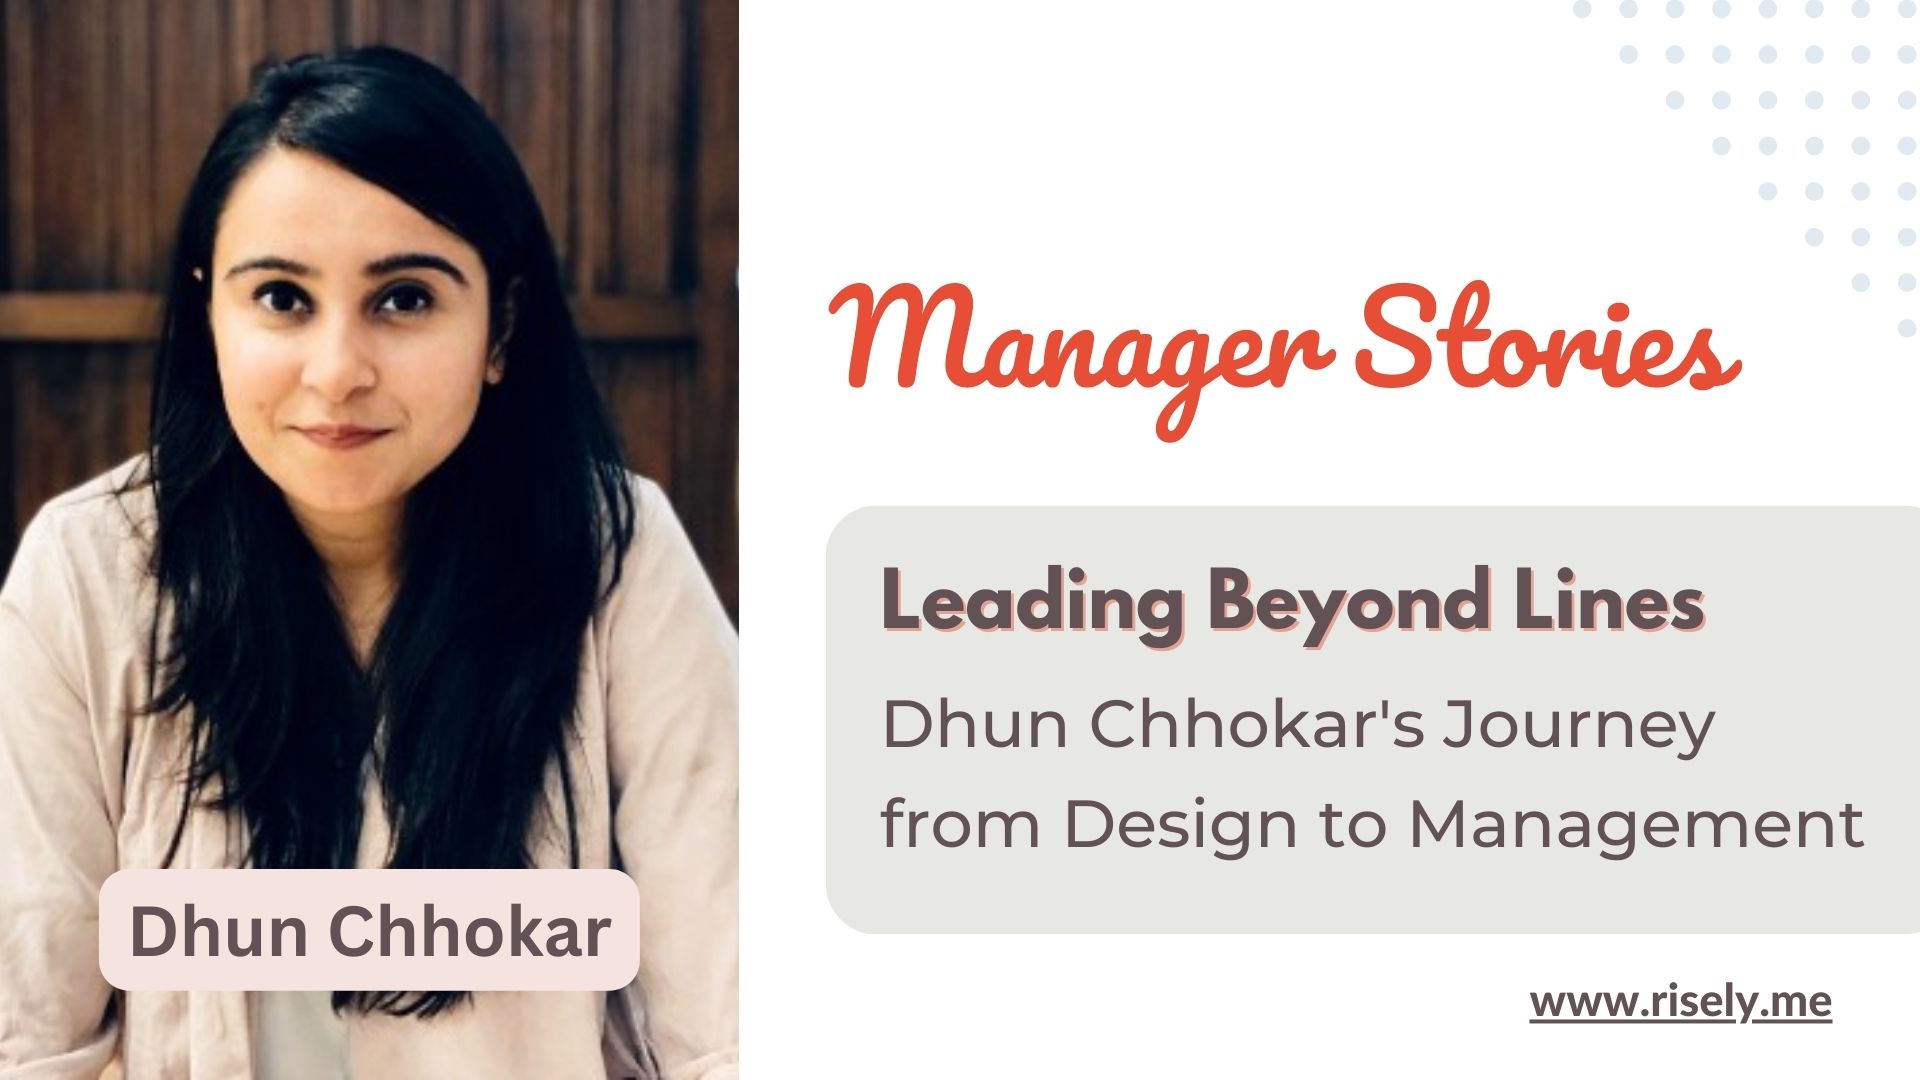 Leading Beyond Lines: Dhun Chhokar’s Journey from Design to Management